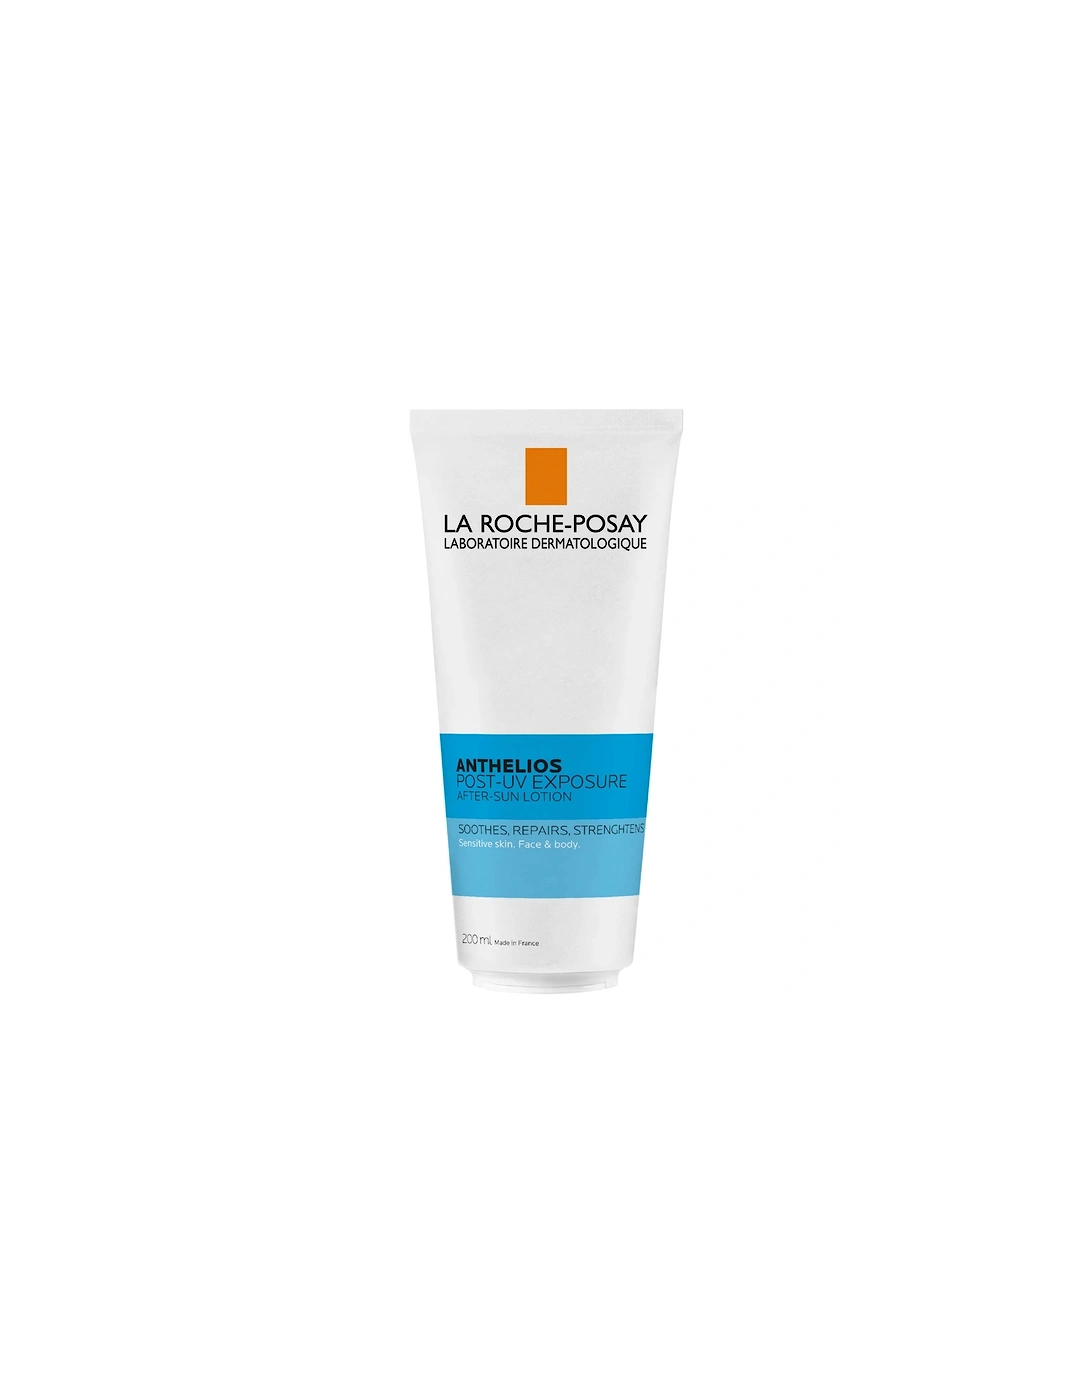 La Roche-Posay Anthelios Post UV Exposure After Sun Lotion 200ml, 2 of 1